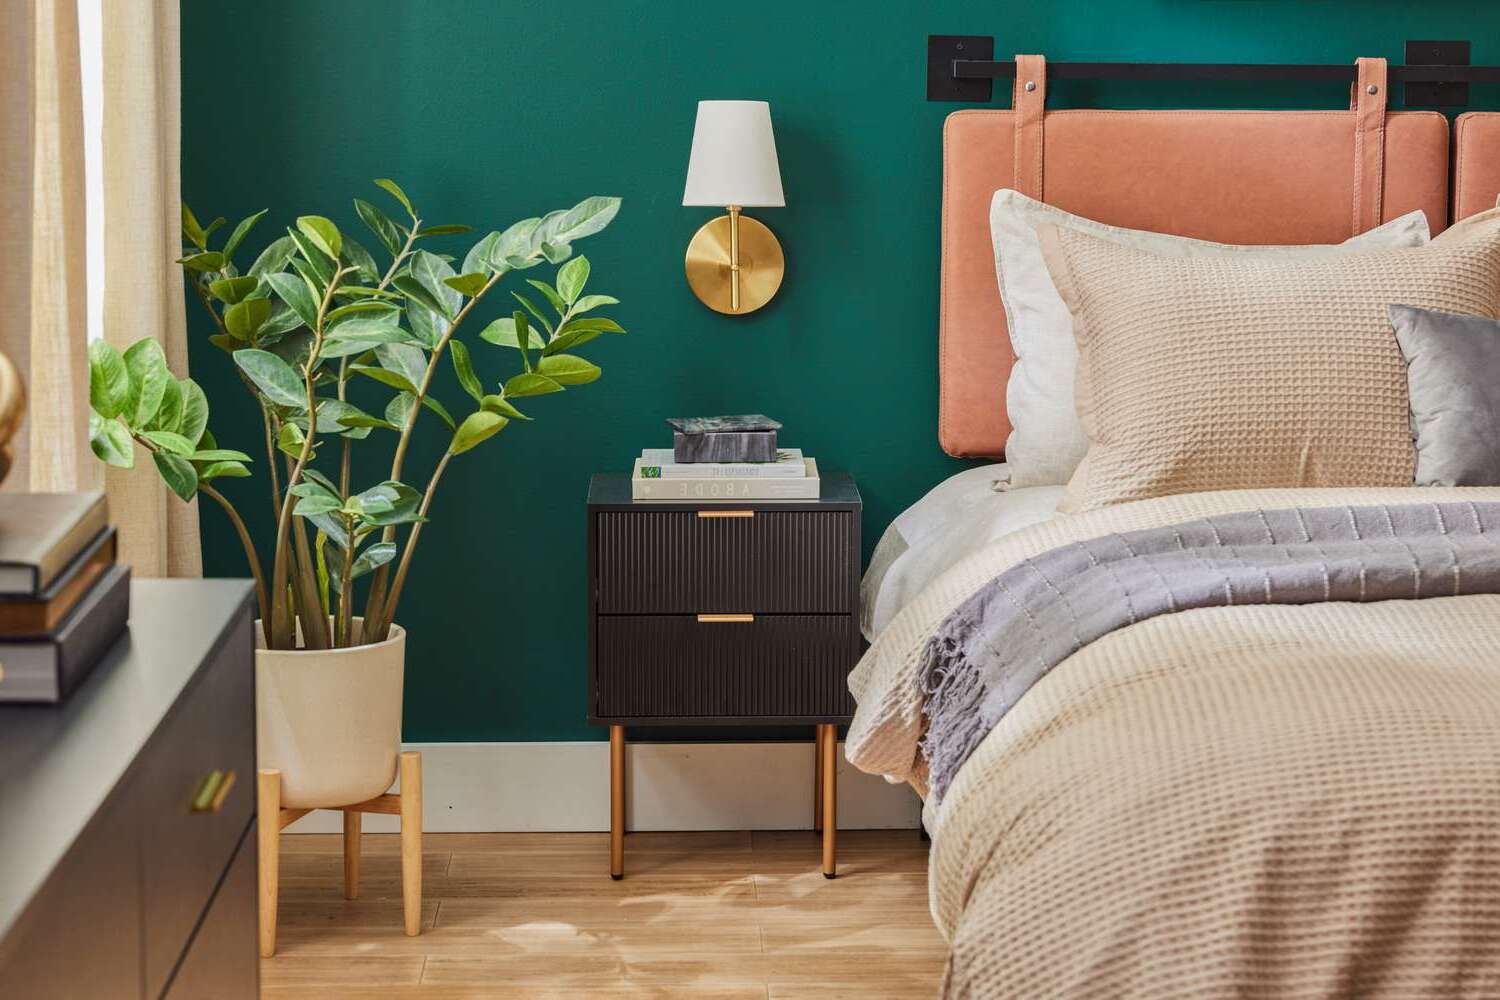 DIY Nightstand: Creative Ideas And Step-by-Step Instructions